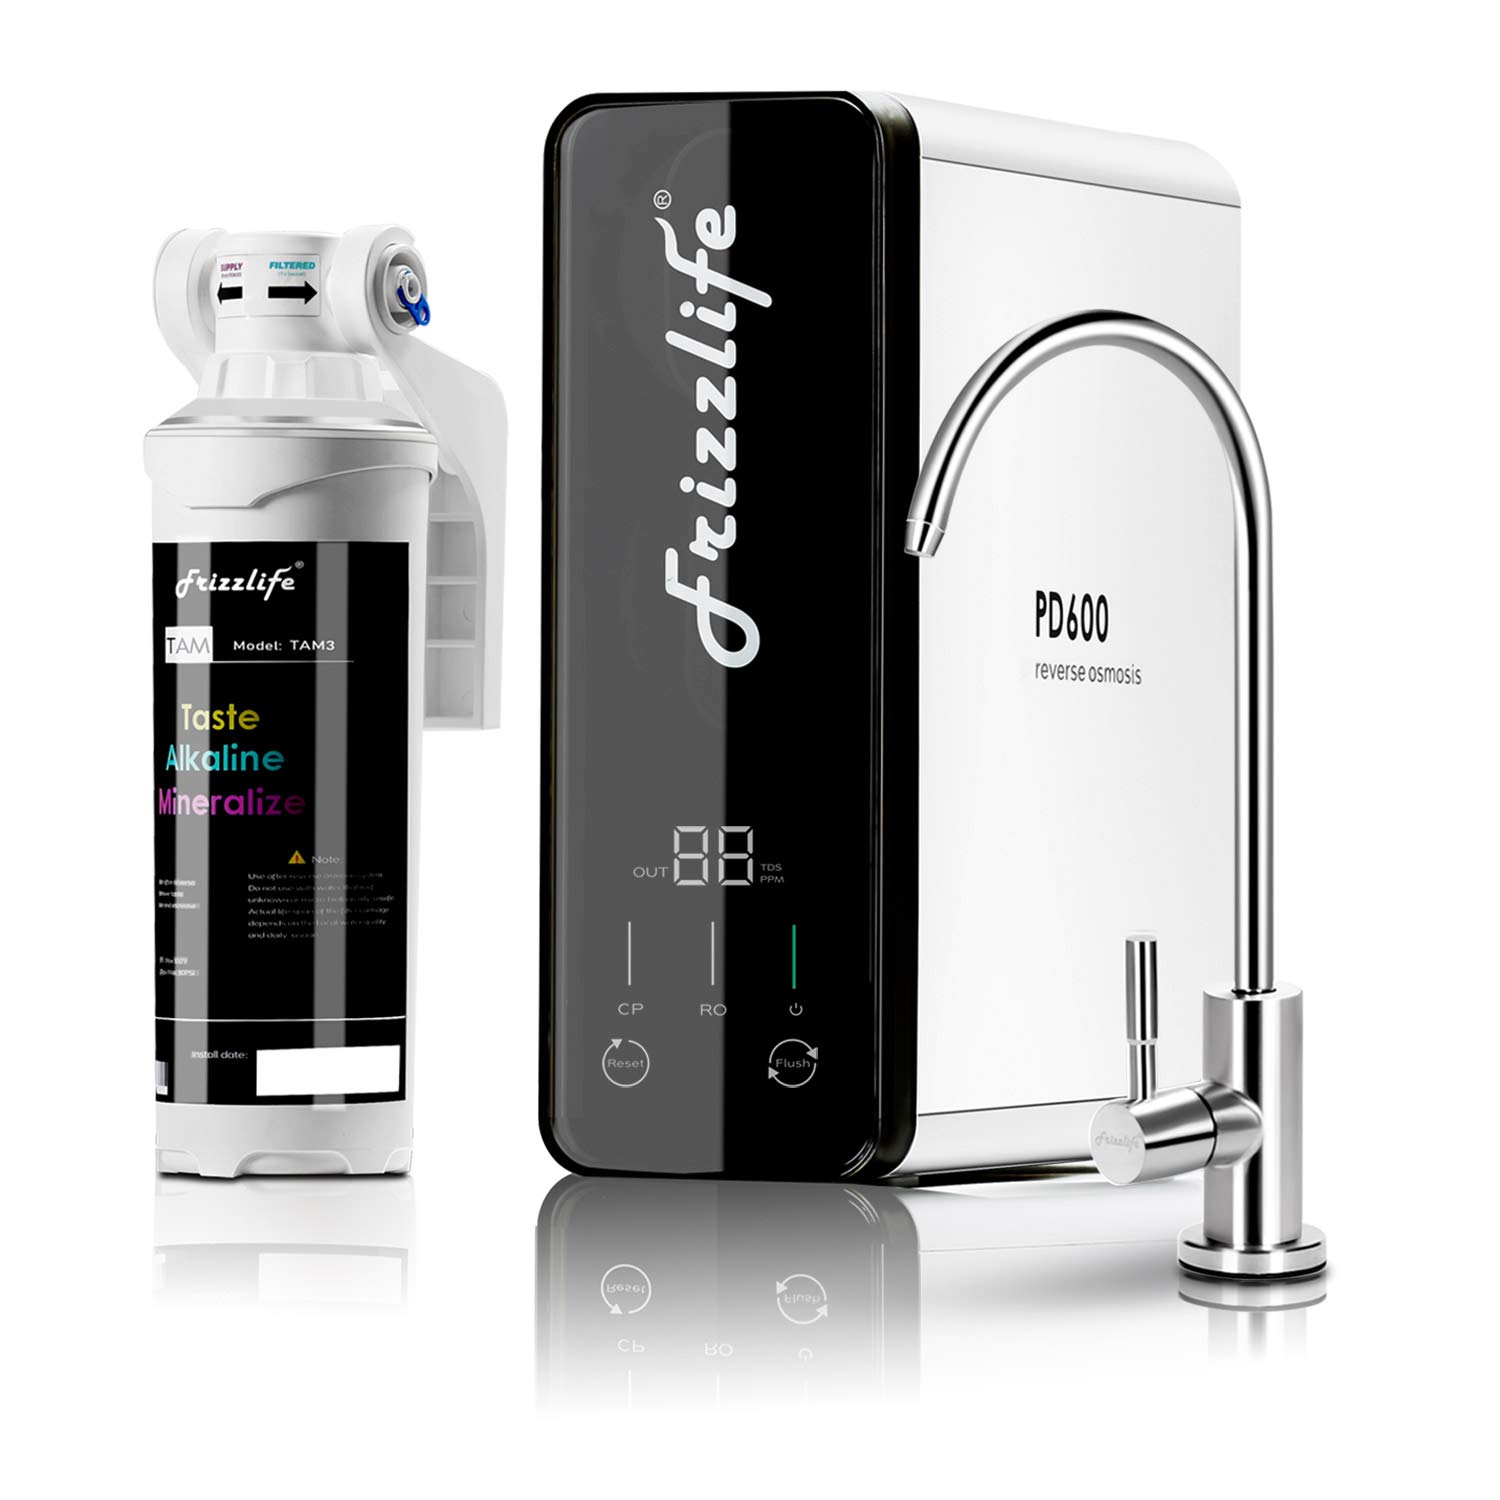  Frizzlife RO Reverse Osmosis Water Filtration System